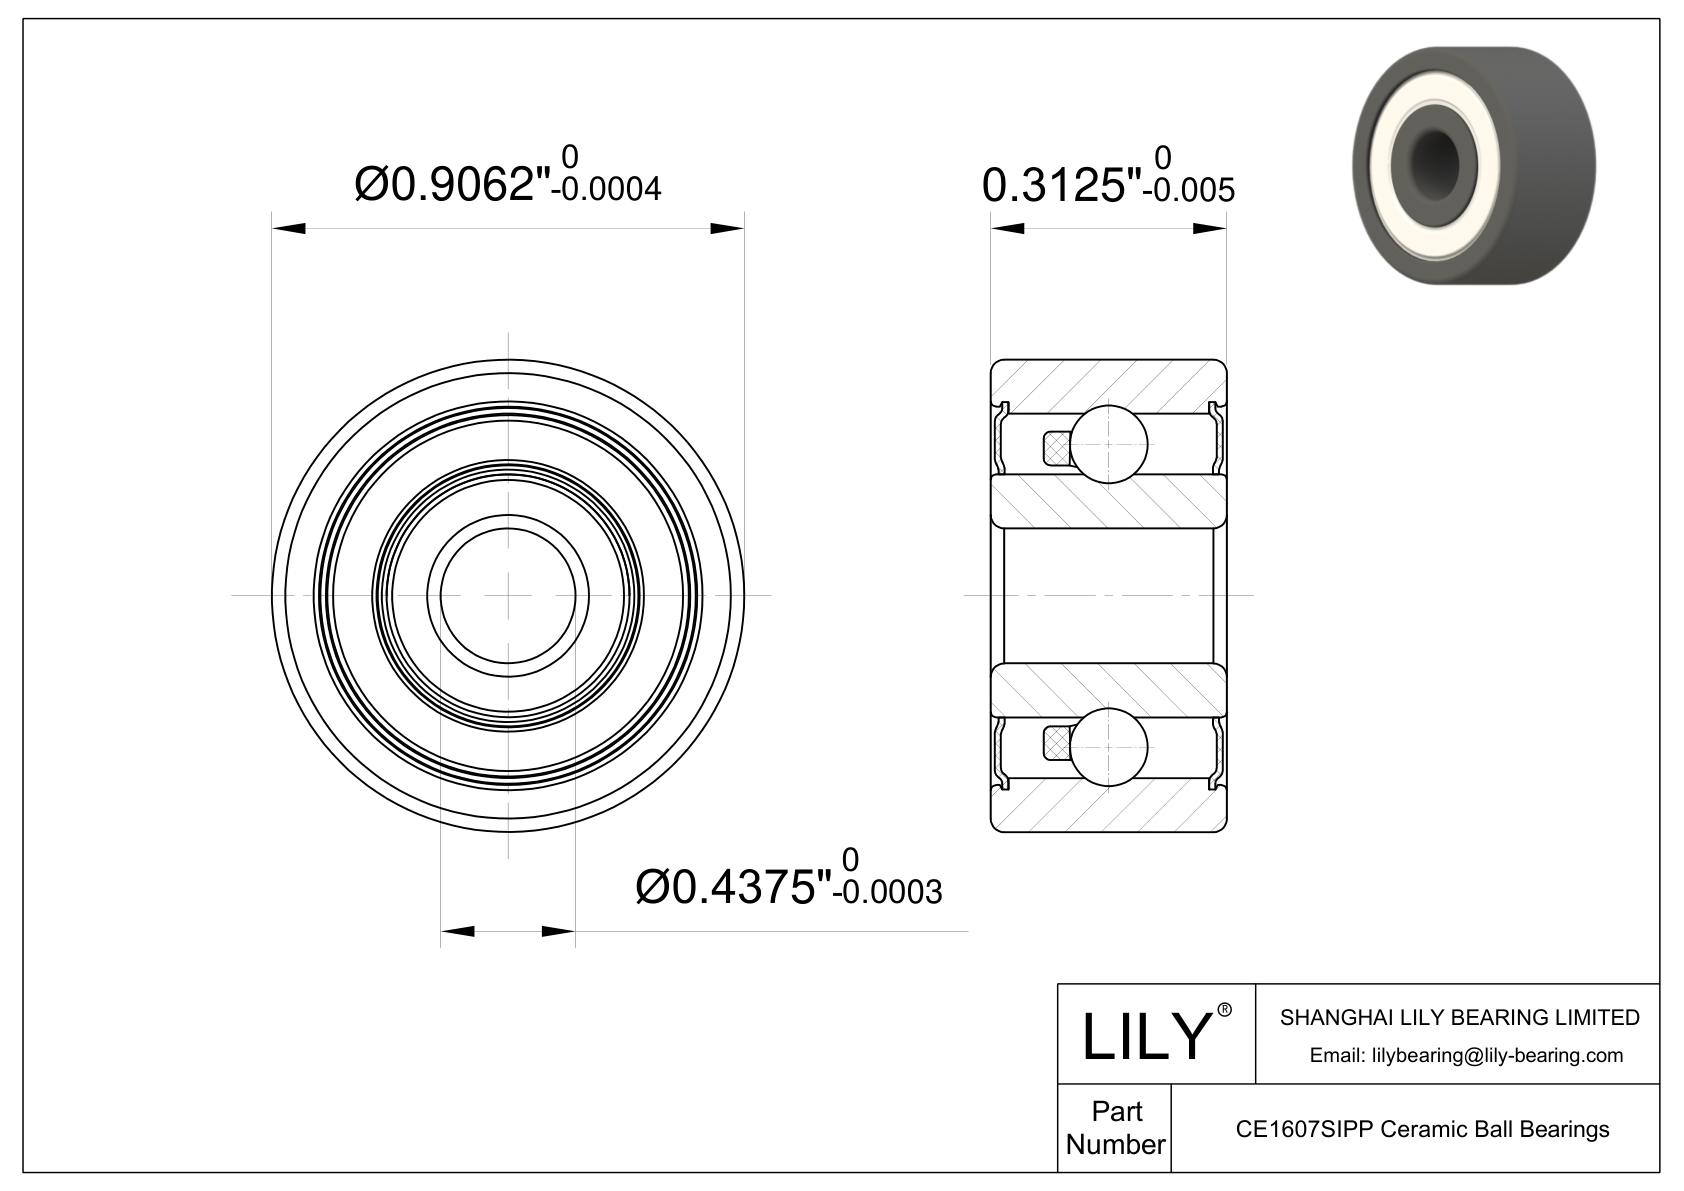 CESI 1607 2RS Inch Size Silicon Nitride Ceramic Bearings cad drawing